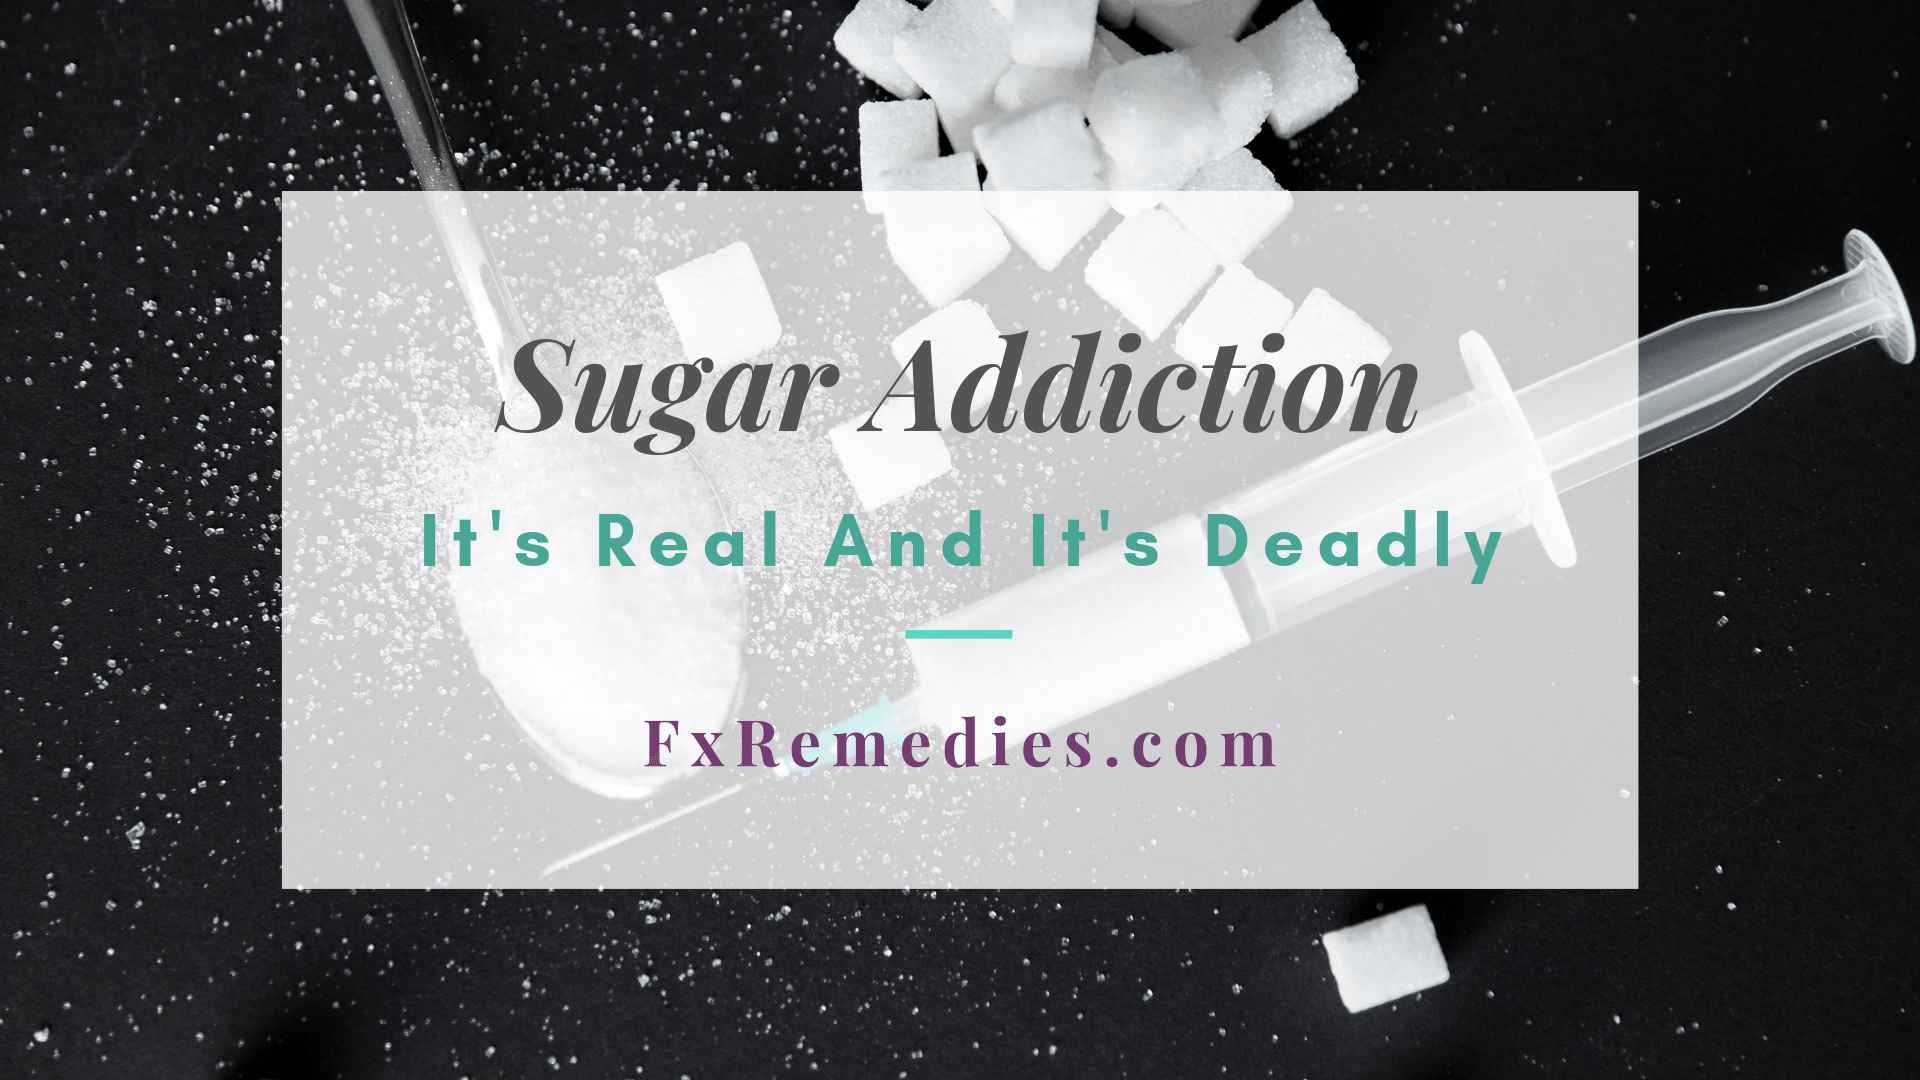 Believe it or not, you may have a sugar addiction. Here’s a scary fact. When scientists took MRI images of the brains of people consuming sugar and highly addictive drug co